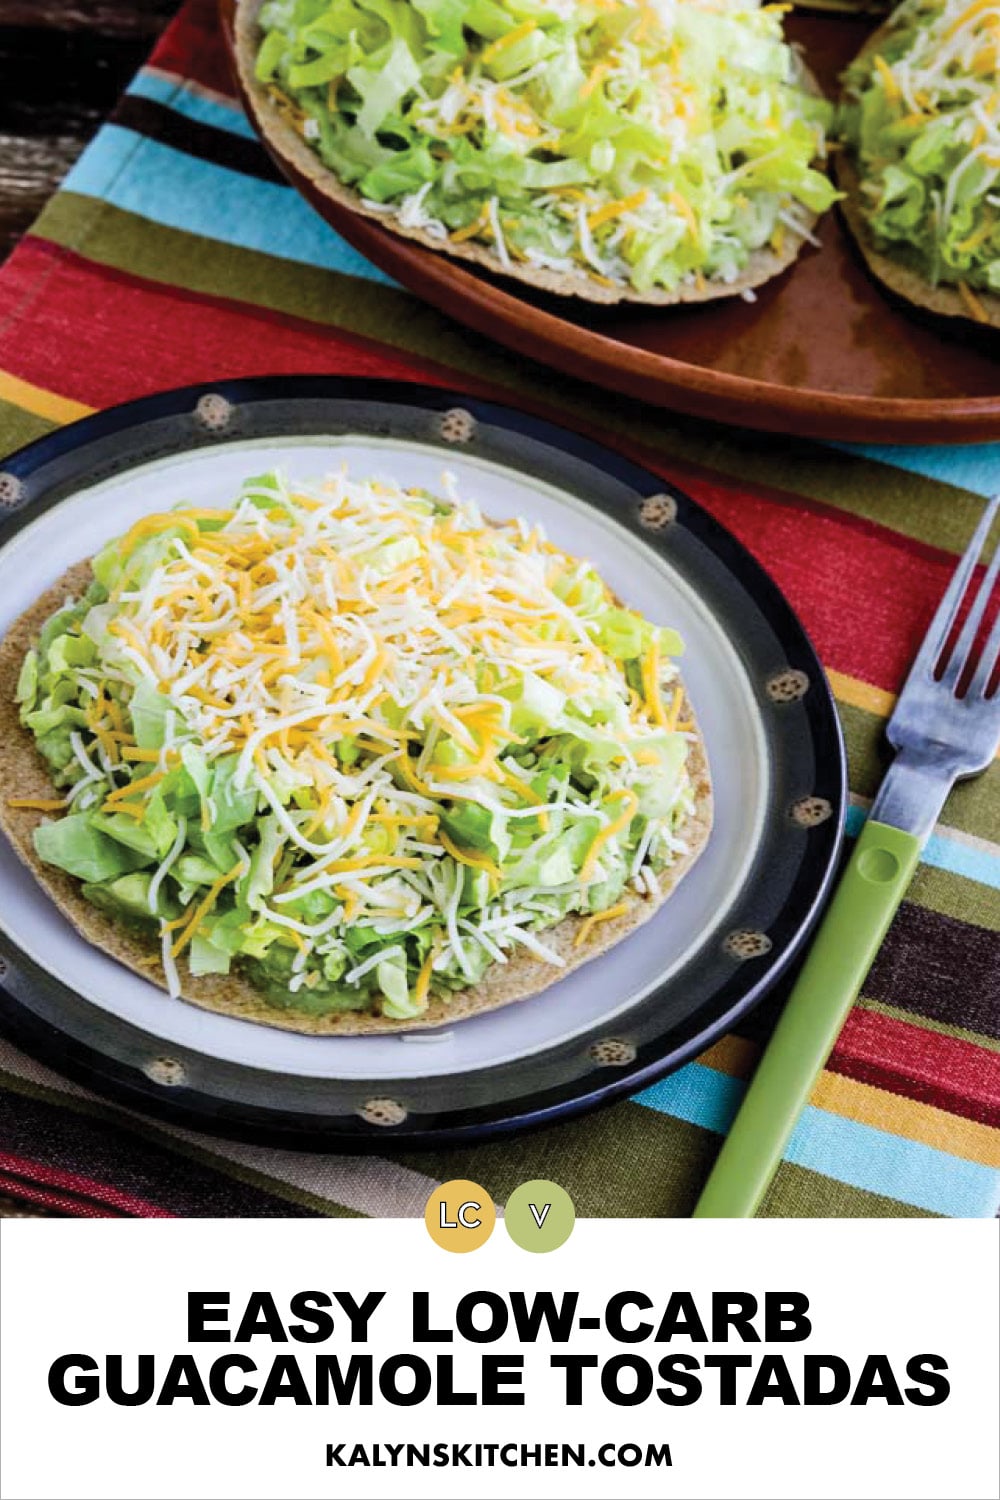 Pinterest image of Easy Low-Carb Guacamole Tostadas